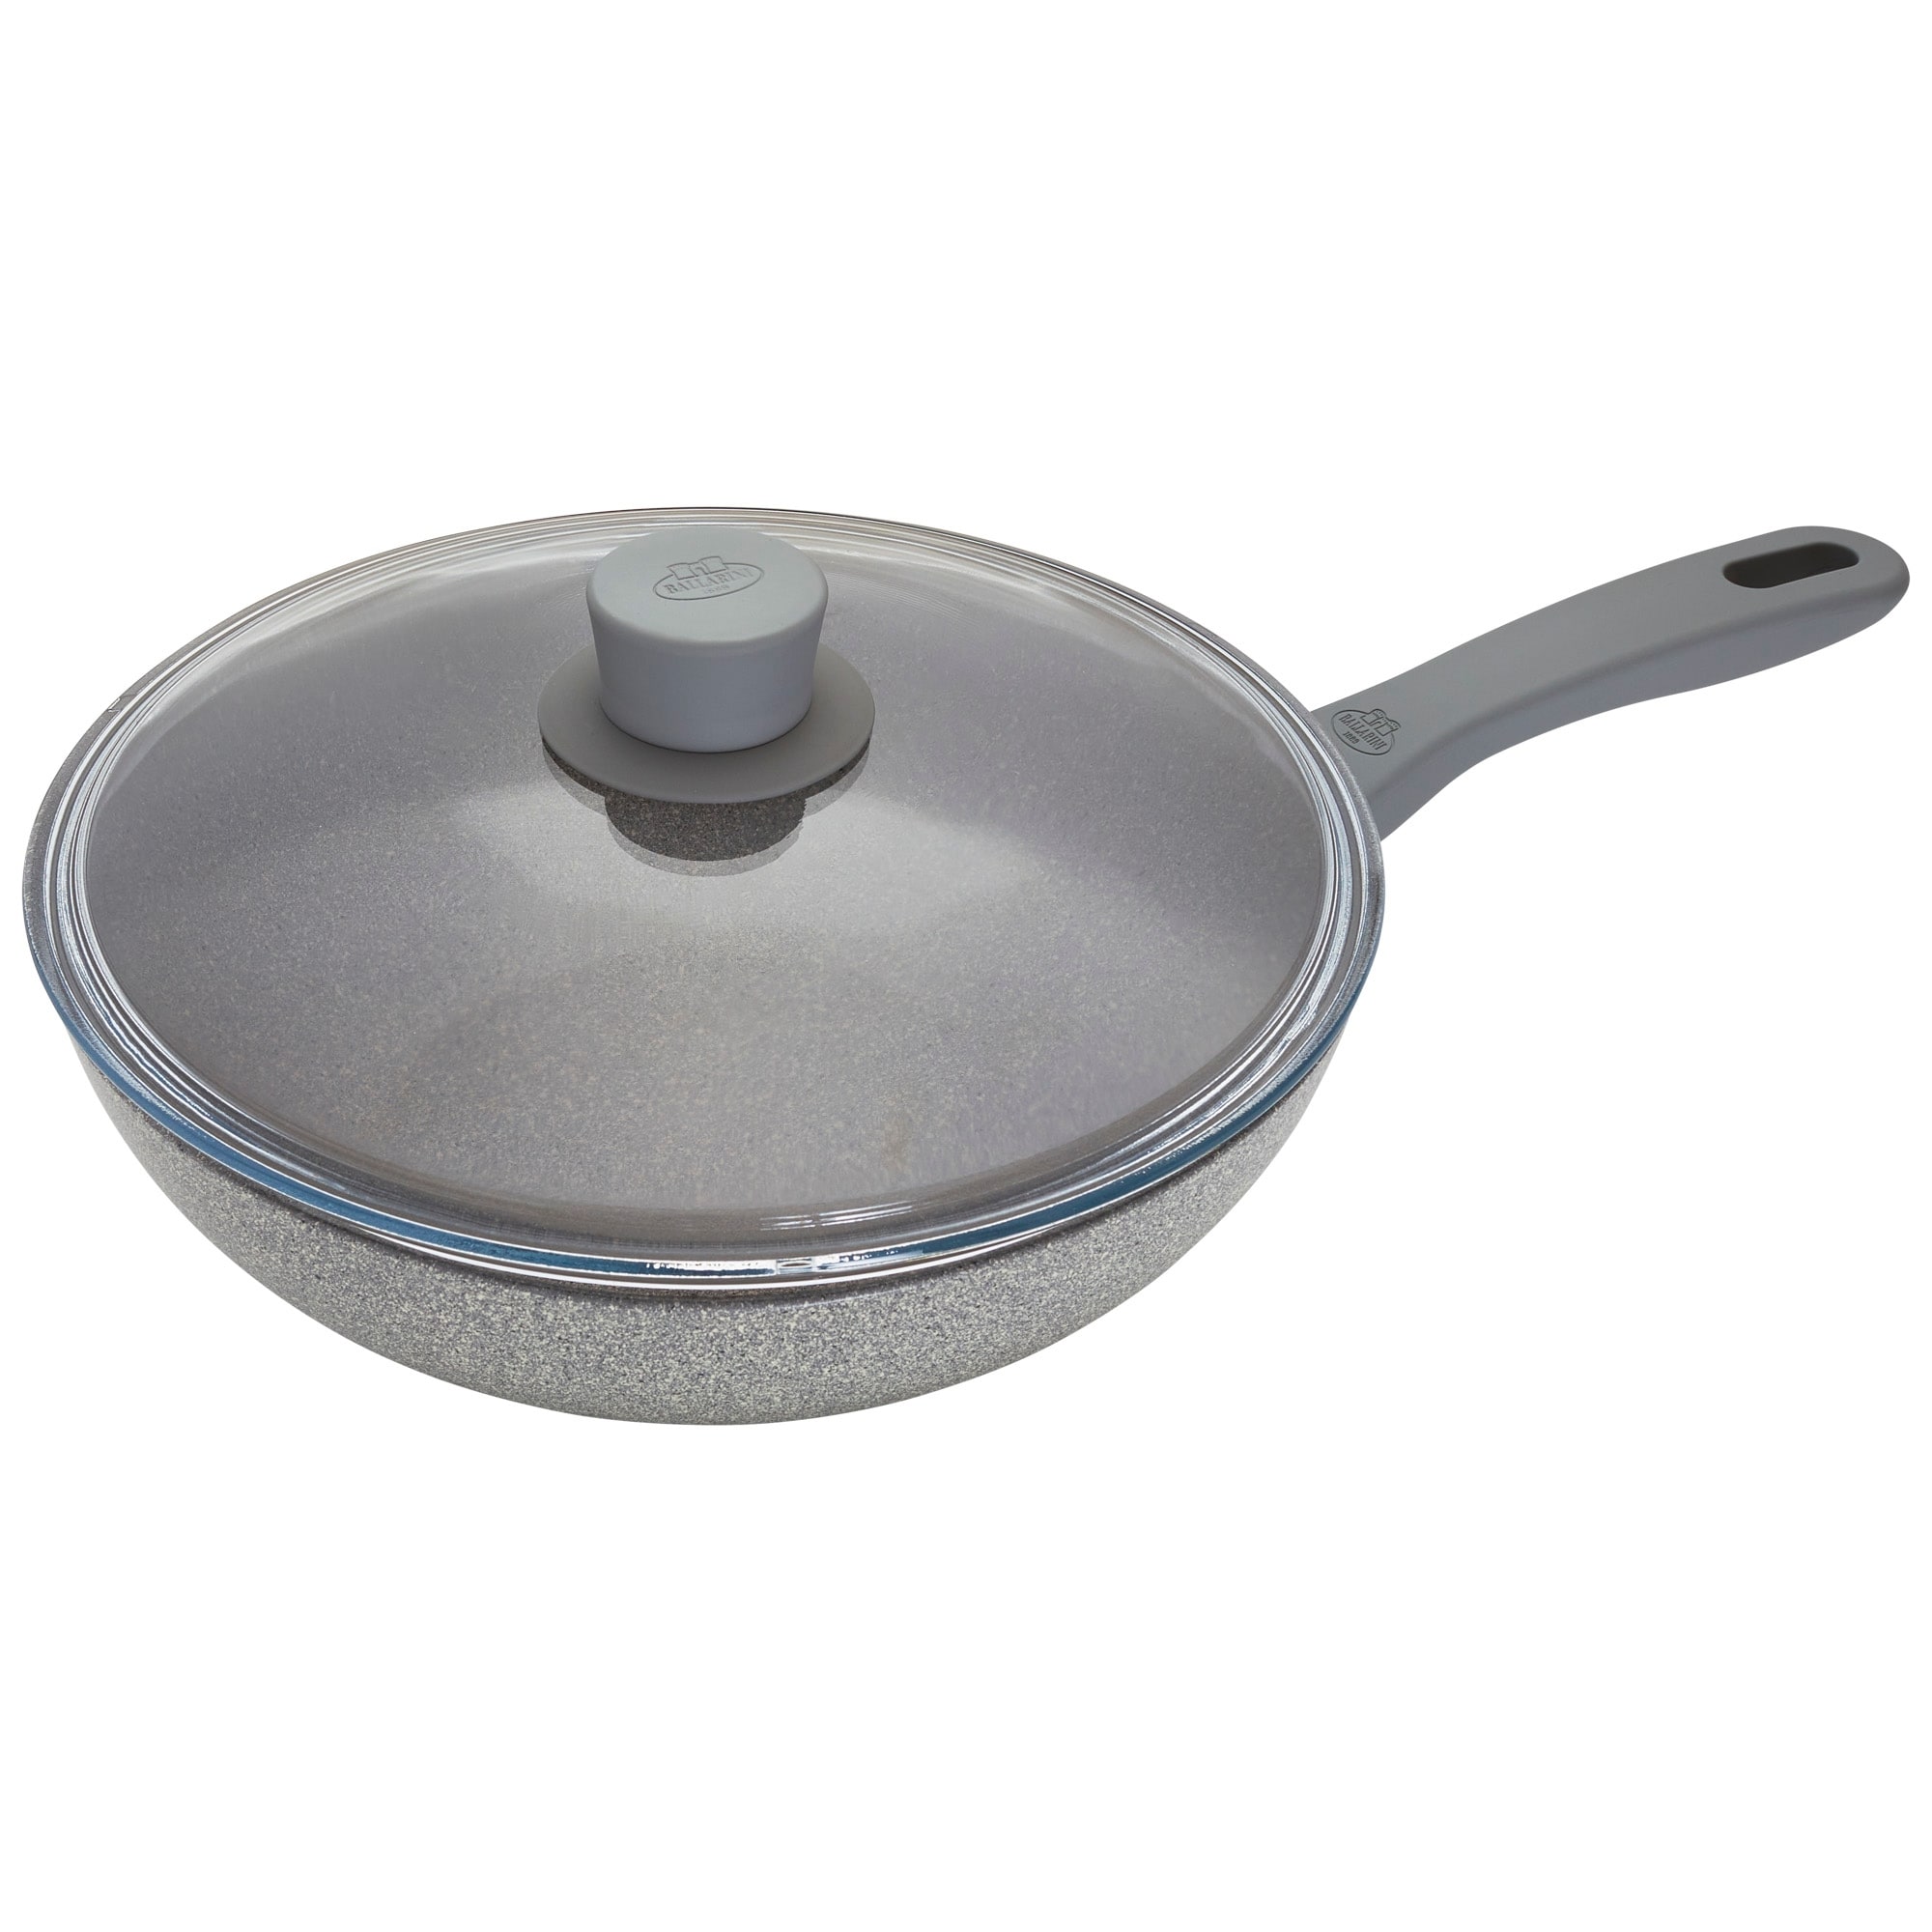 ZWILLING Madura Plus Forged 1.5-qt Aluminum Nonstick Saucepan with